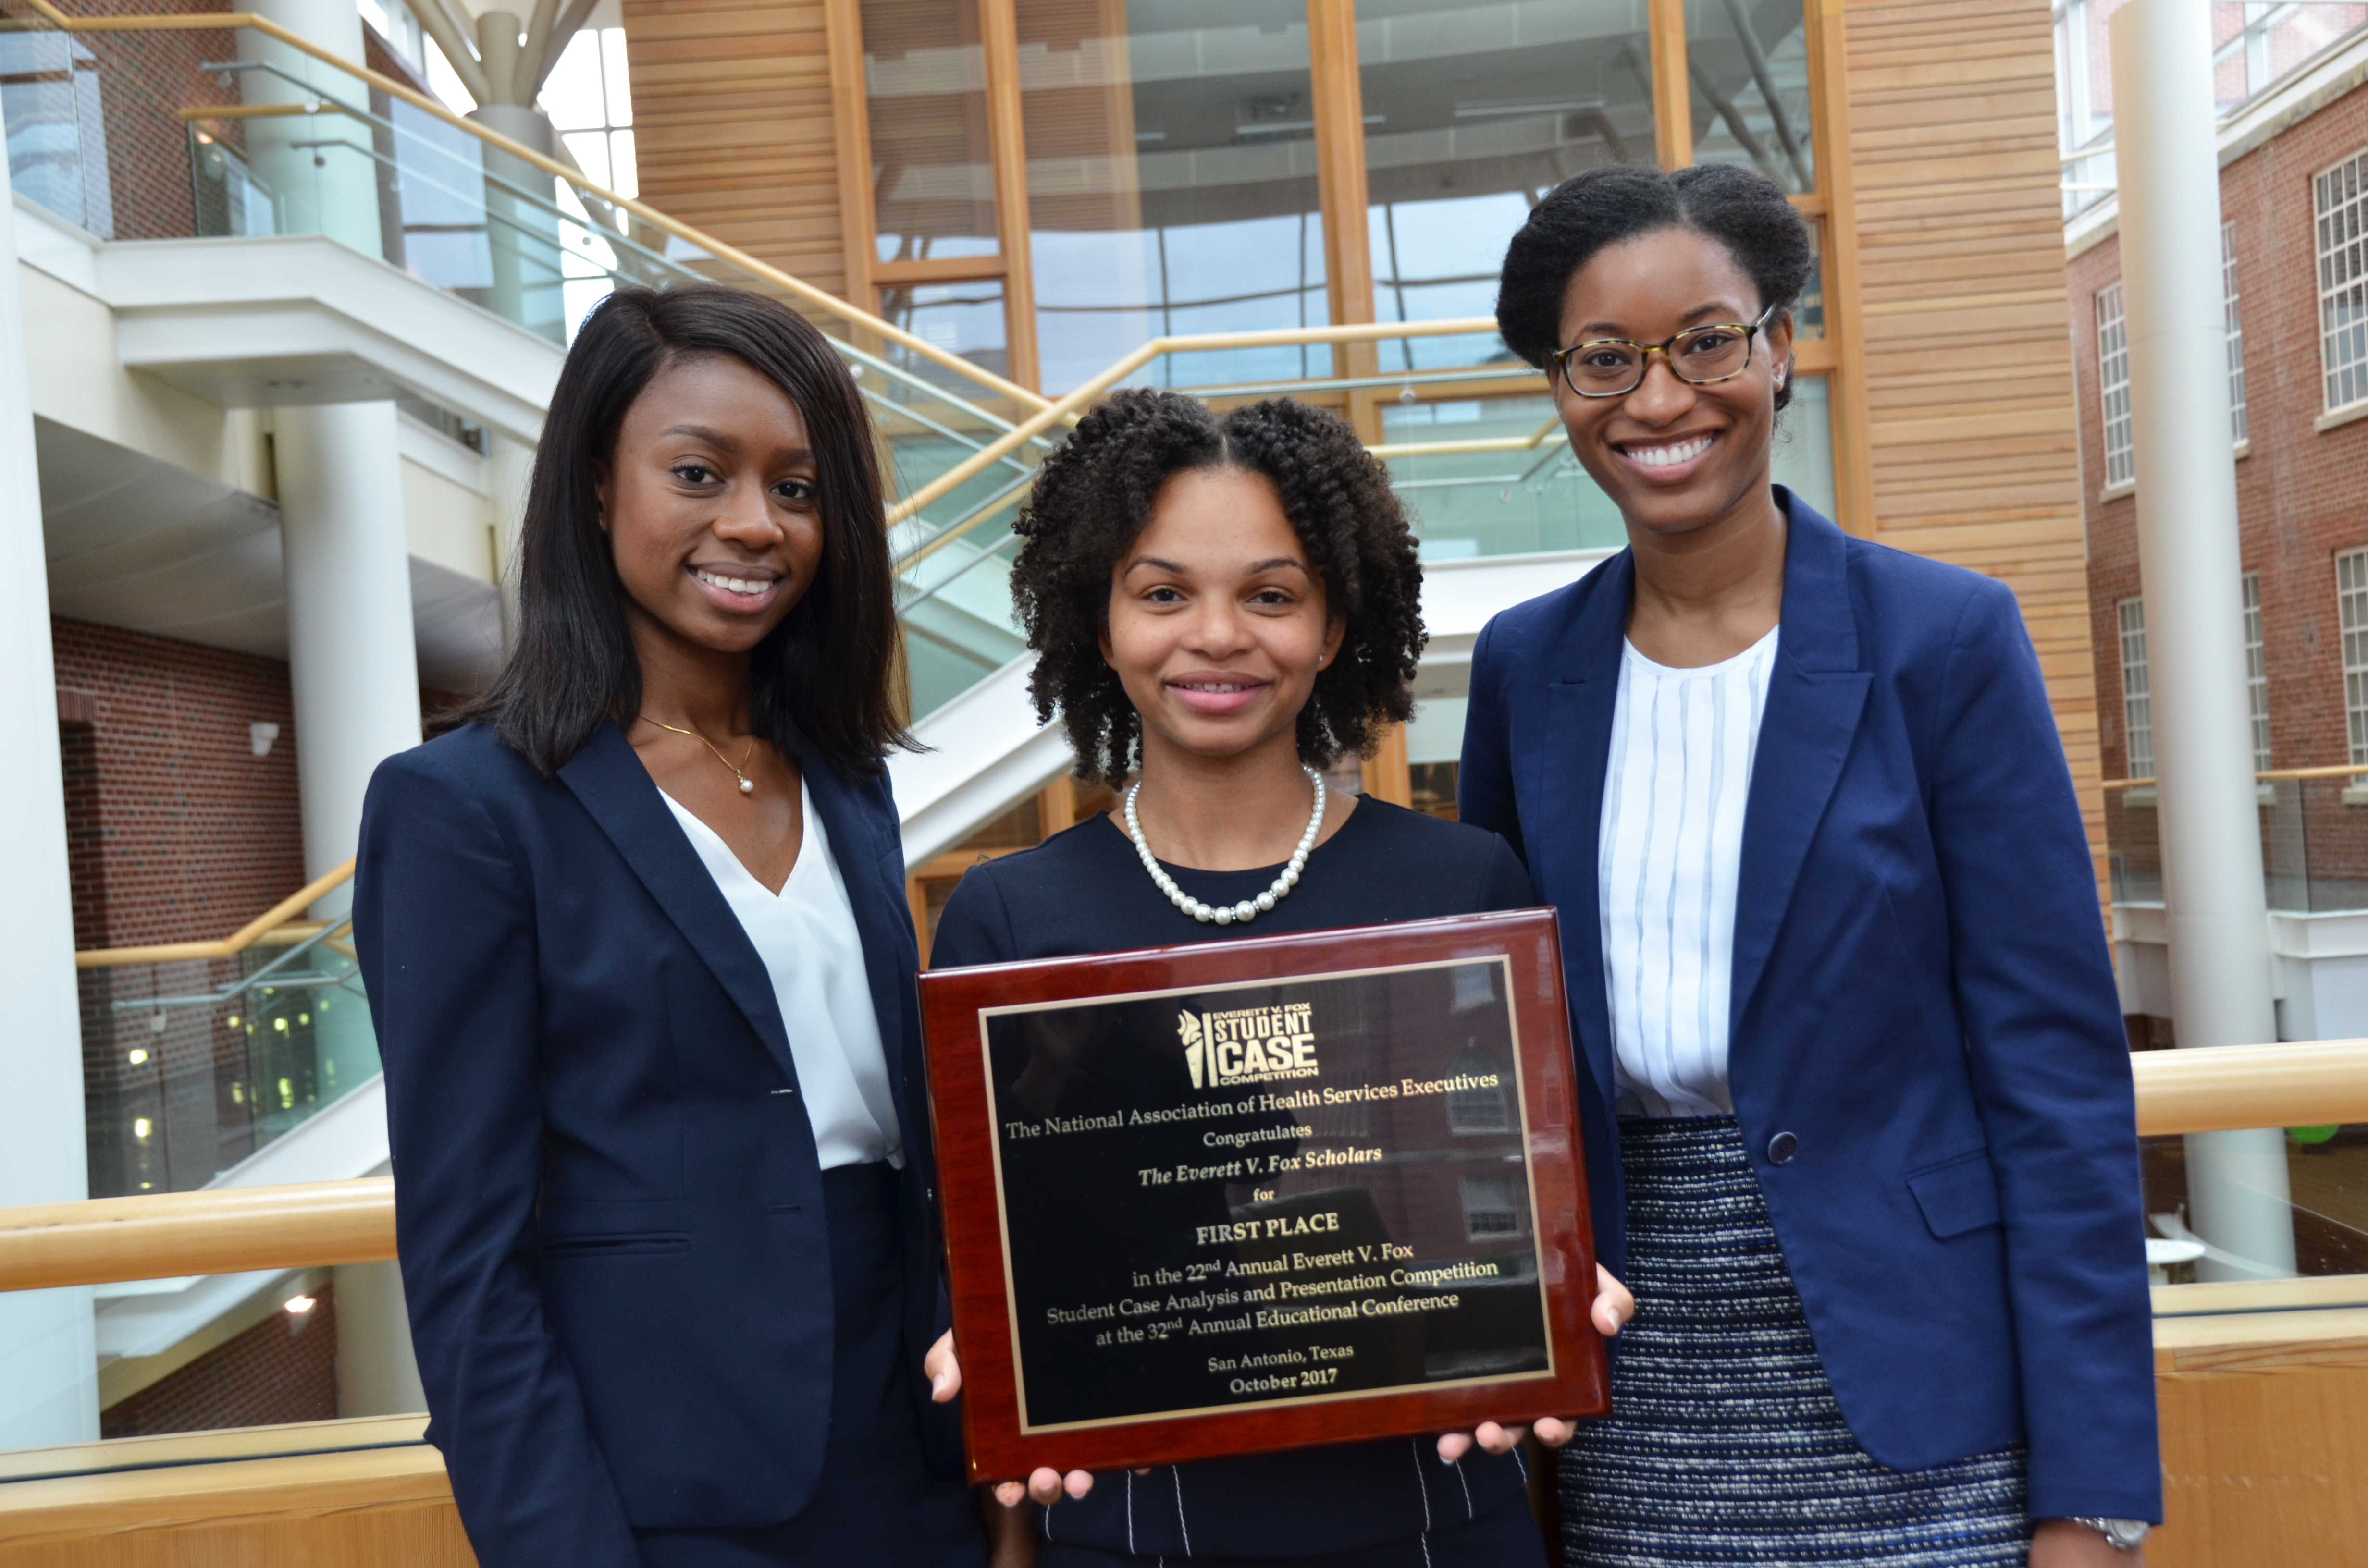 Left to right are Oluoma Chukwu, Lauren Jordan and Jessica Broadus, winners of the Everett Fox Student Case Competition. (Photo by Linda Kastleman)